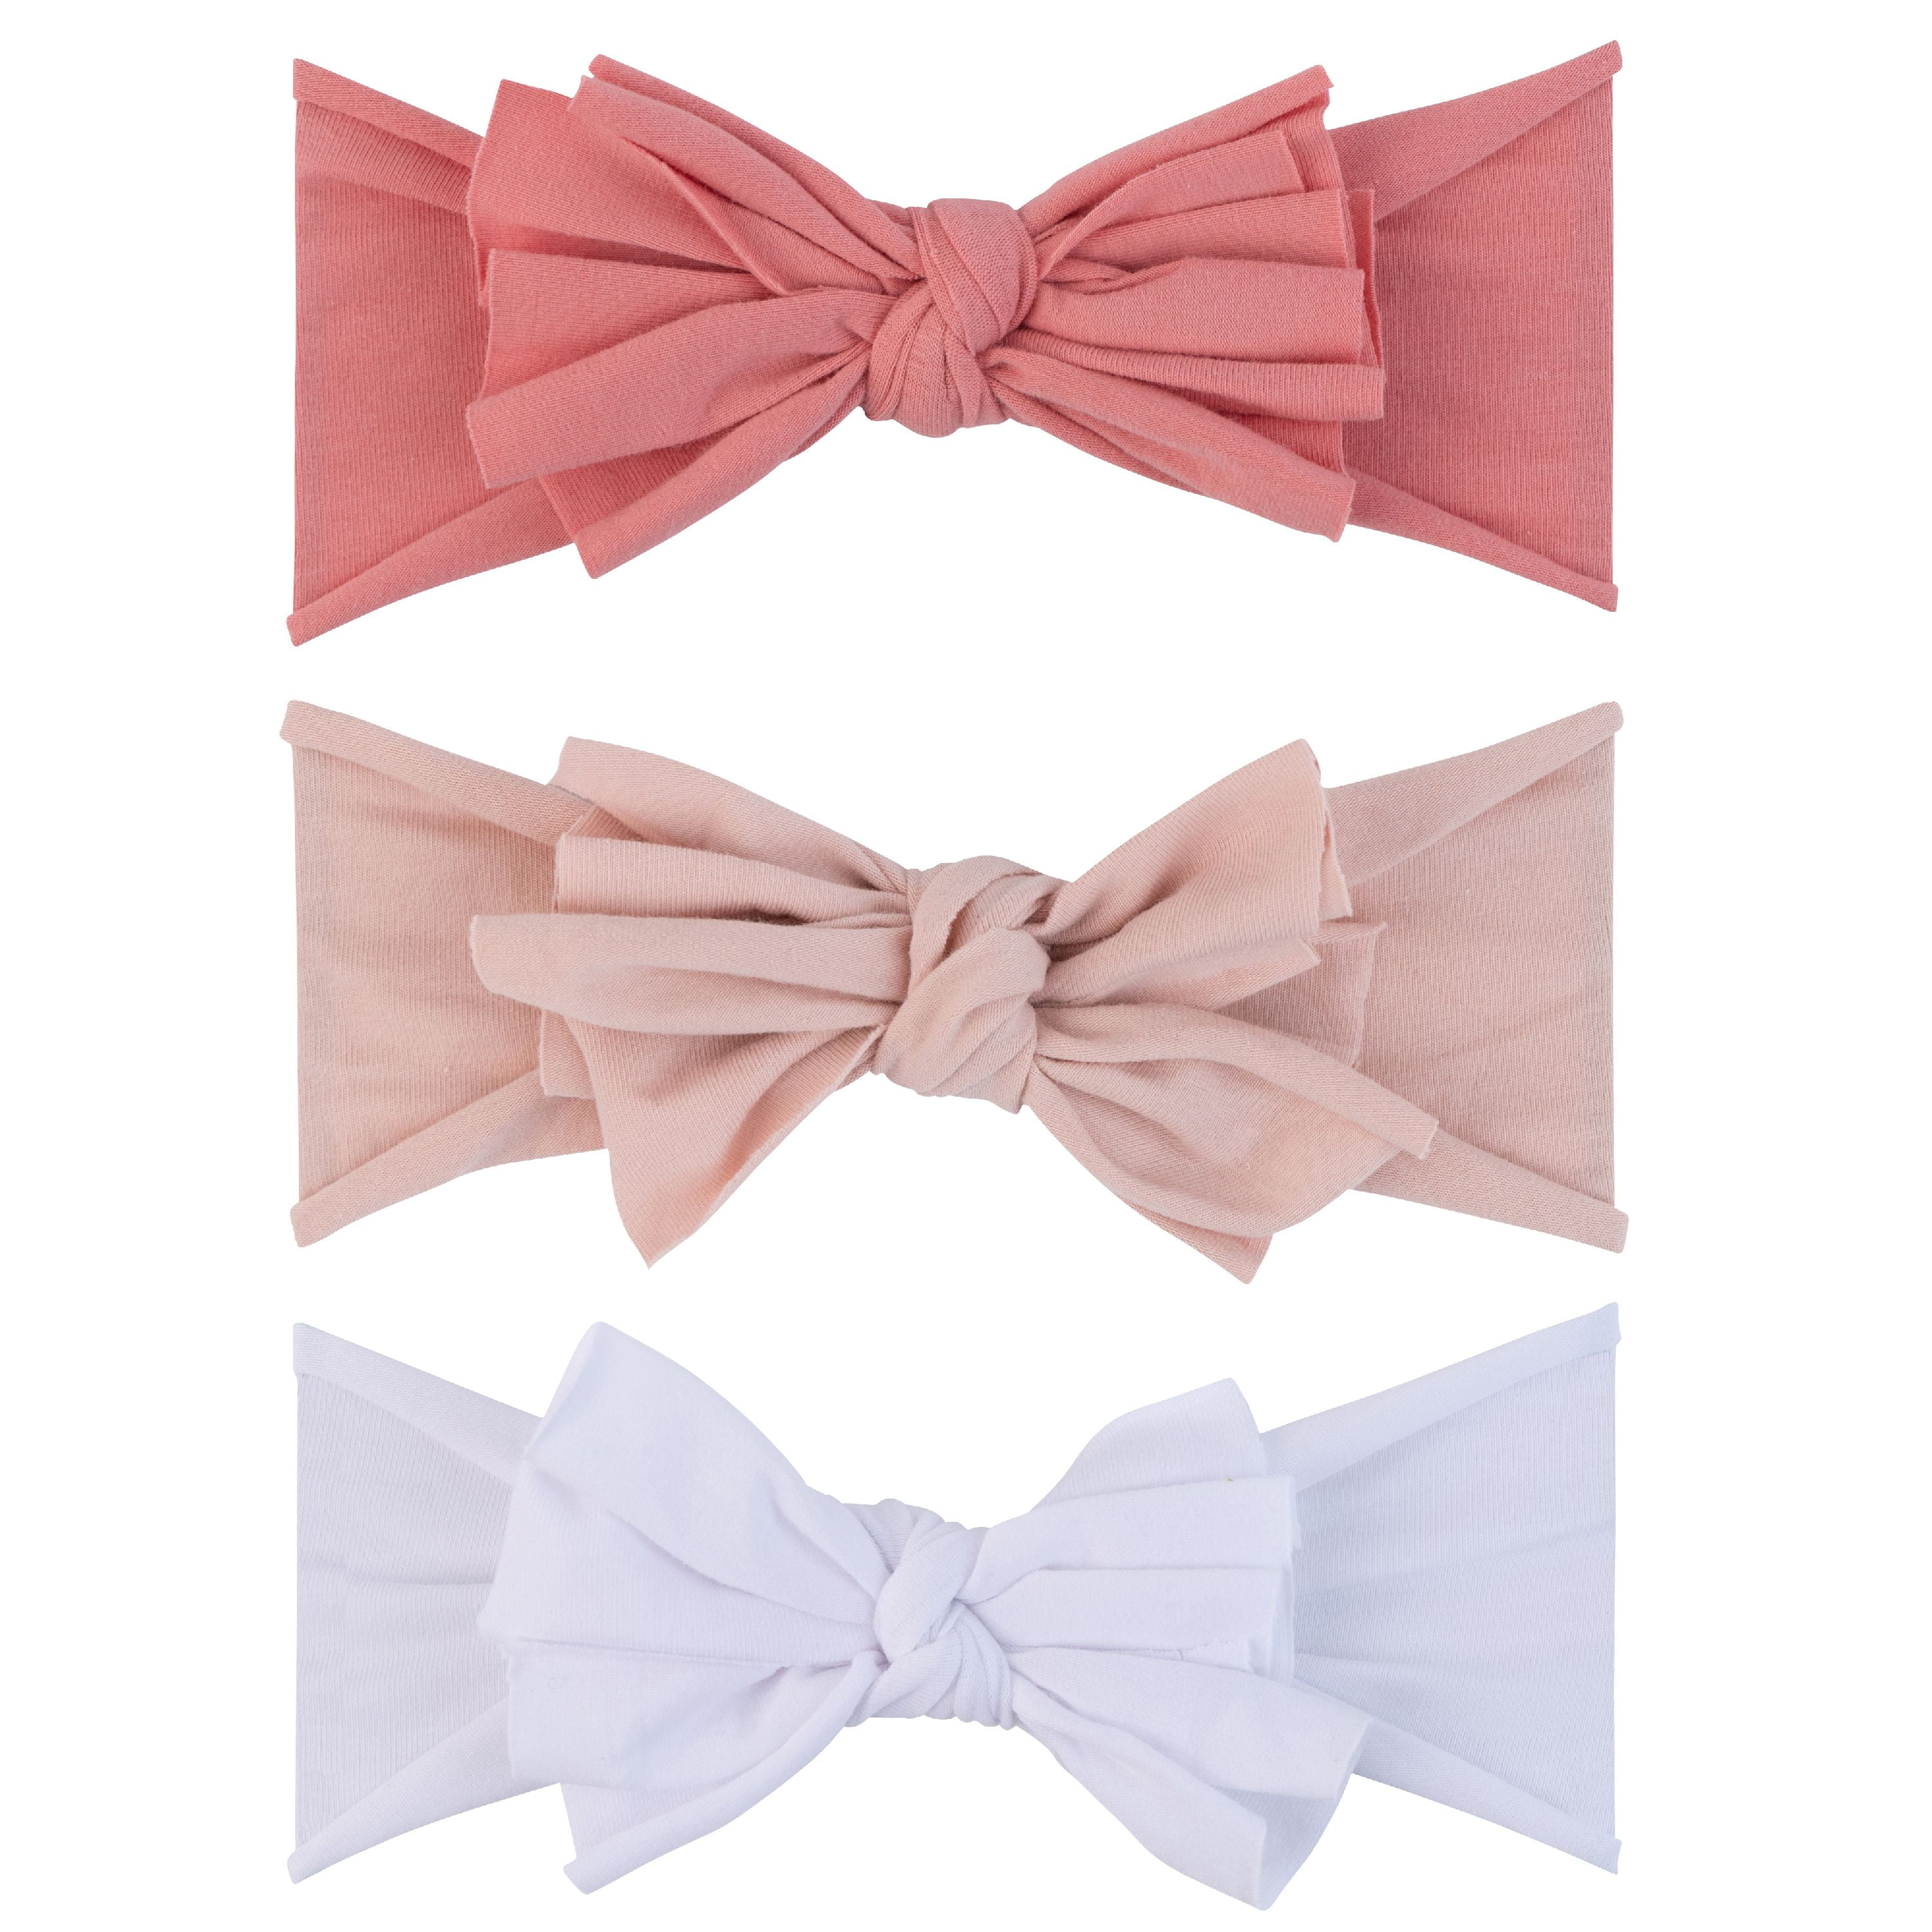 Extra Soft Baby's Pink Silky Lycra Hair Band with Pink Satin Bow 0-3 YEARS 